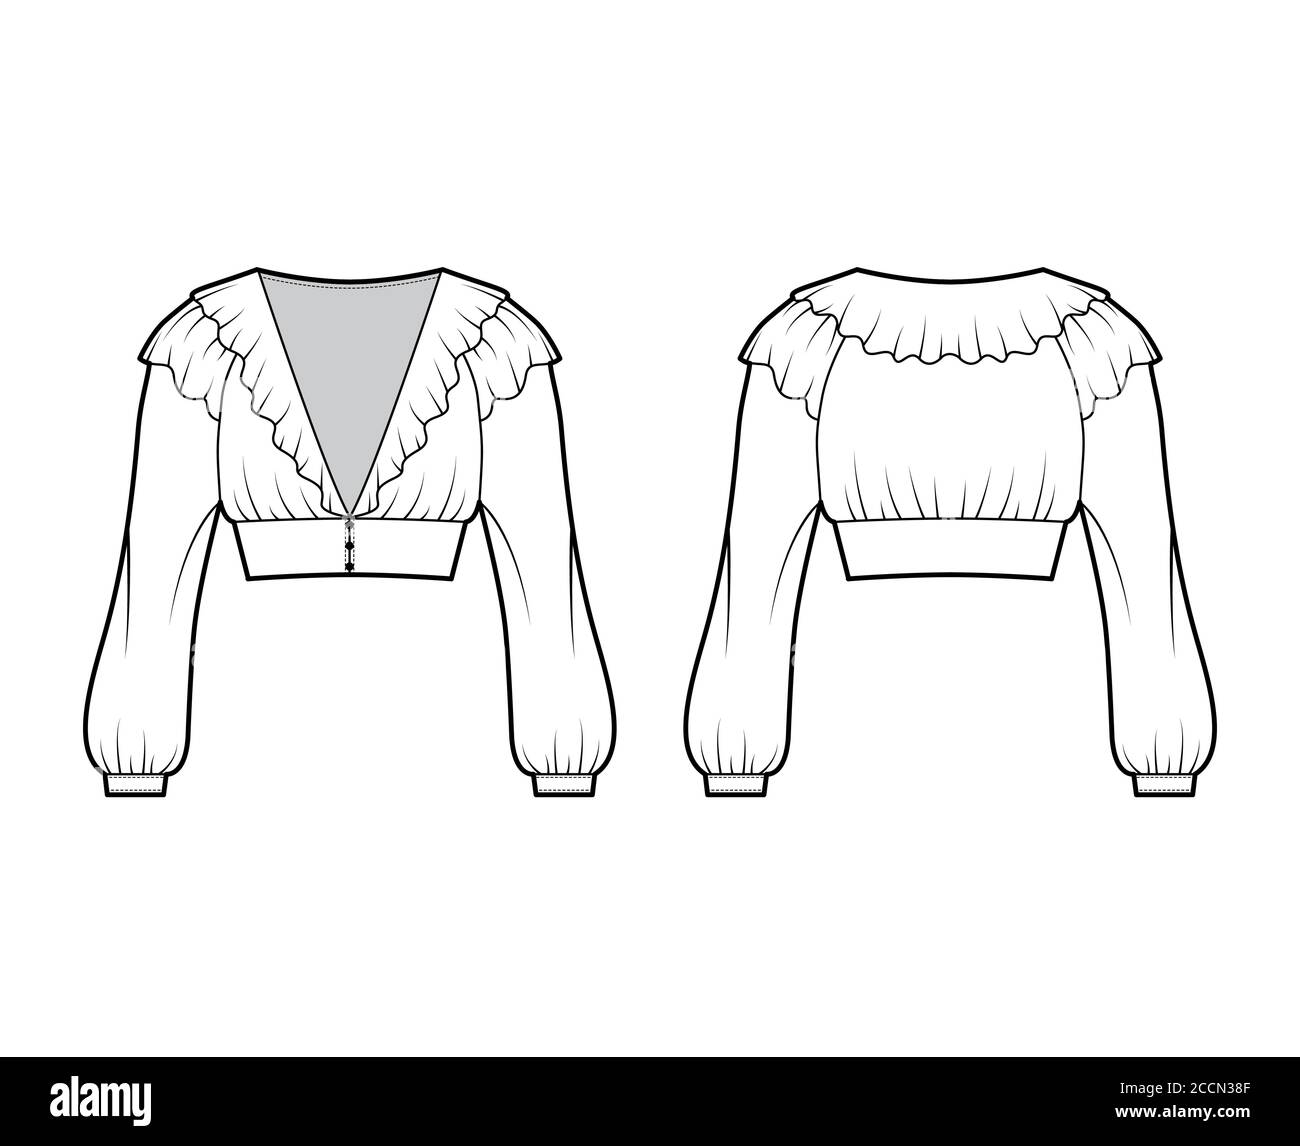 Ruffled cropped blouse technical fashion illustration with long bishop sleeves, puffed shoulders, front button fastenings. Flat apparel top template front, back white color. Women men unisex shirt CAD Stock Vector